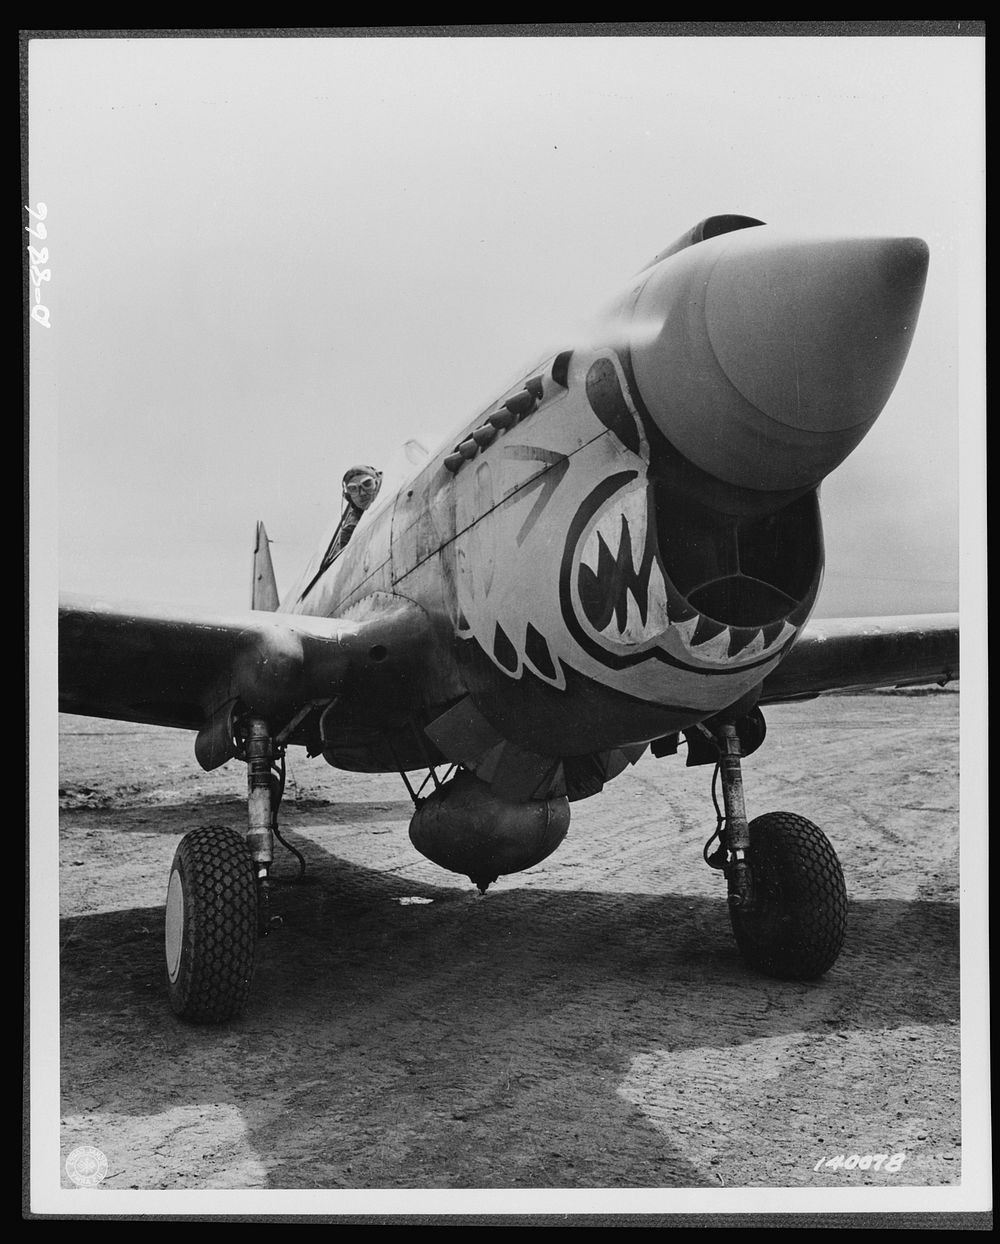 Aircraft. Army. One of the redoubled "Flying Tigers" ready to take off from an Alaskan point in a Curtis P-40 "Warhawk"…